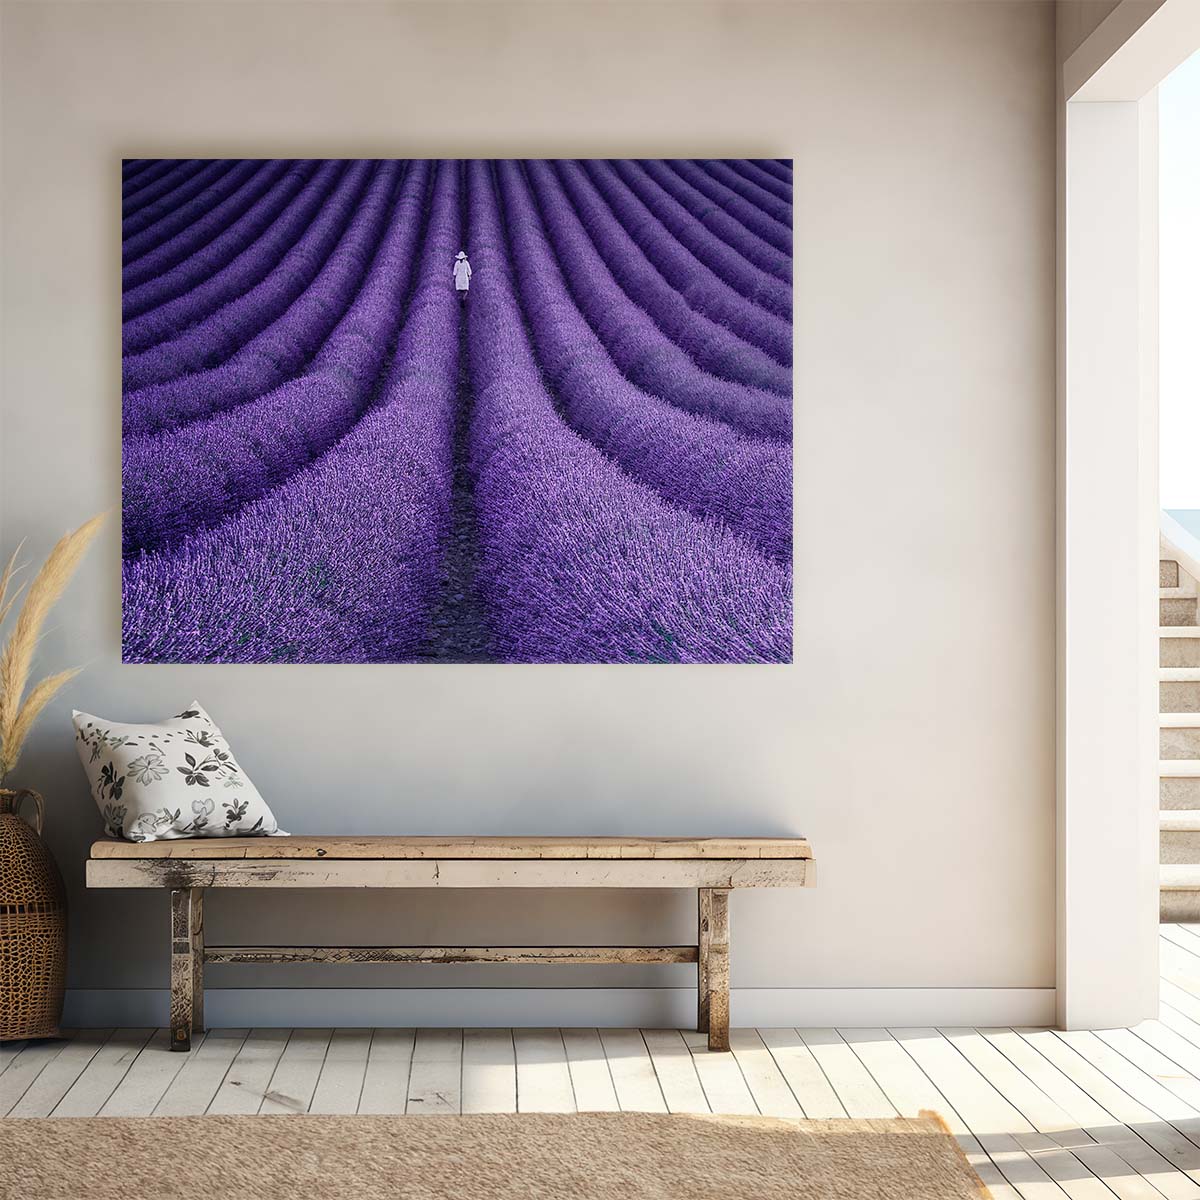 Summer Lavender Field & Woman Perspective Wall Art by Luxuriance Designs. Made in USA.